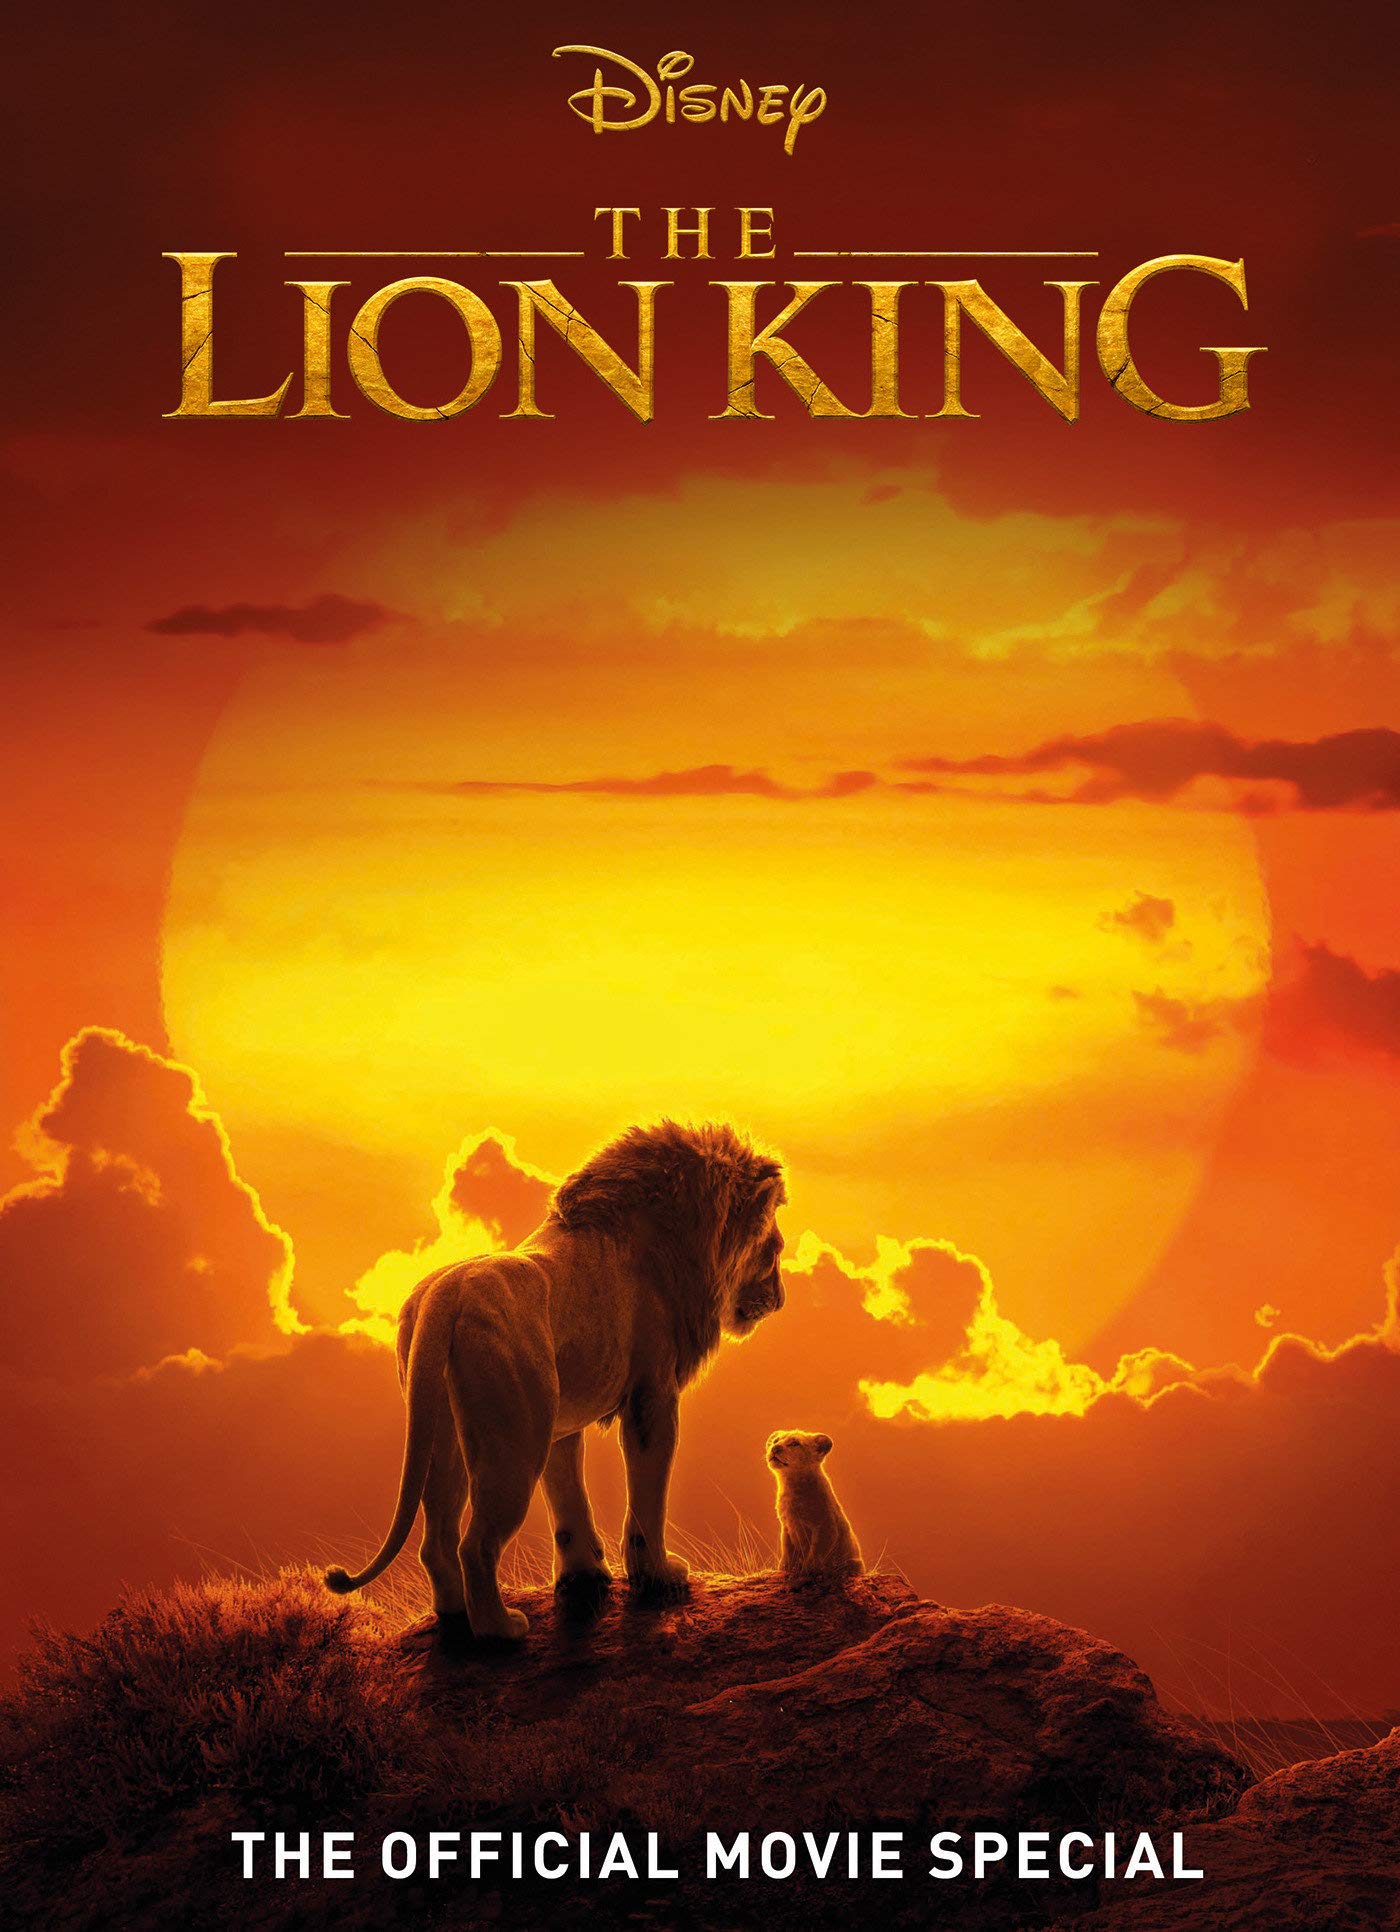 Disney The Lion King: The Official Movie Special